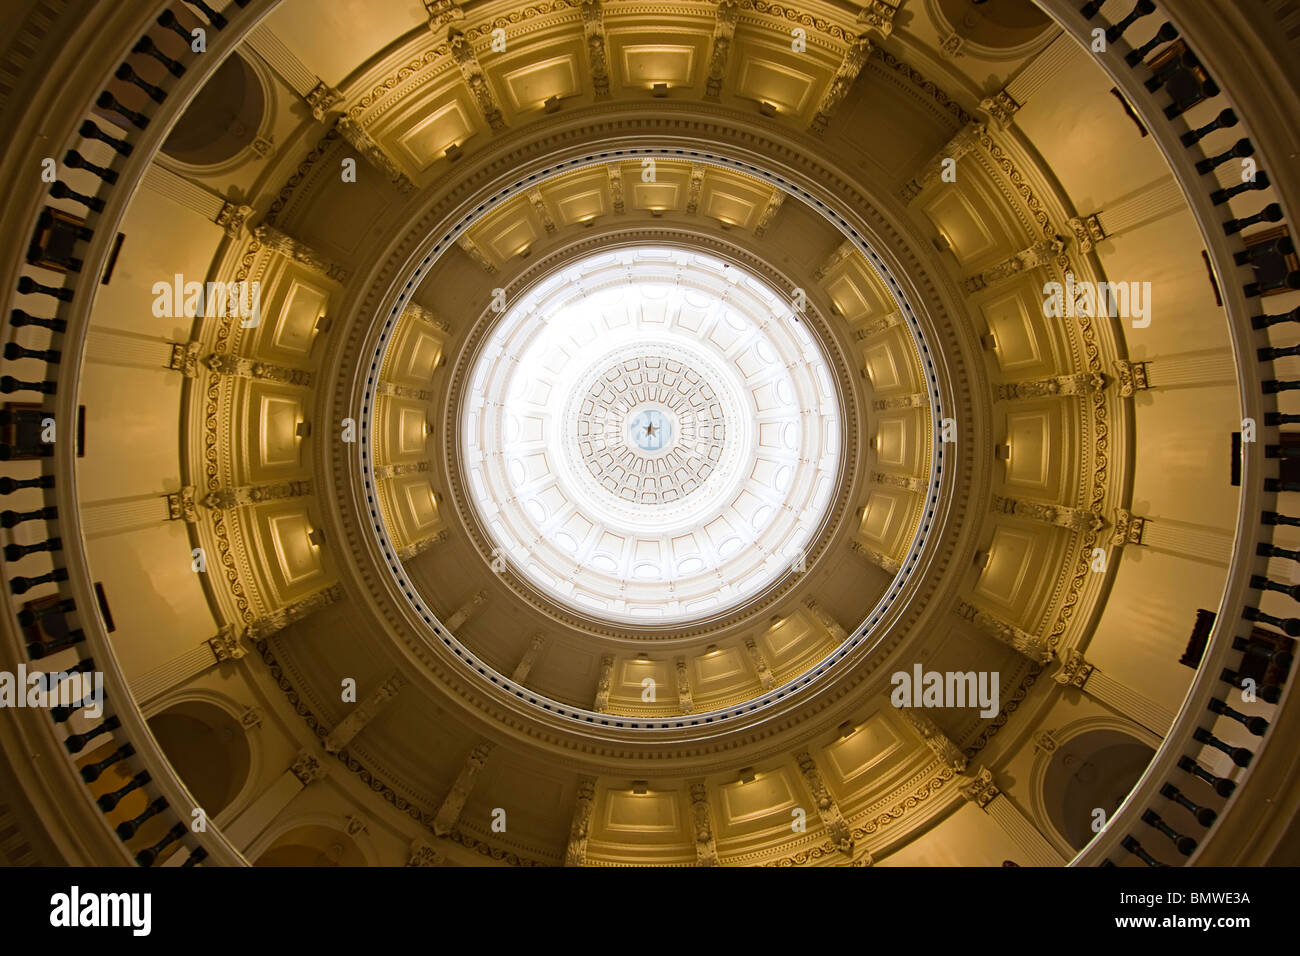 Domed ceiling and galleries Texas State Capitol Building Austin Texas USA Stock Photo